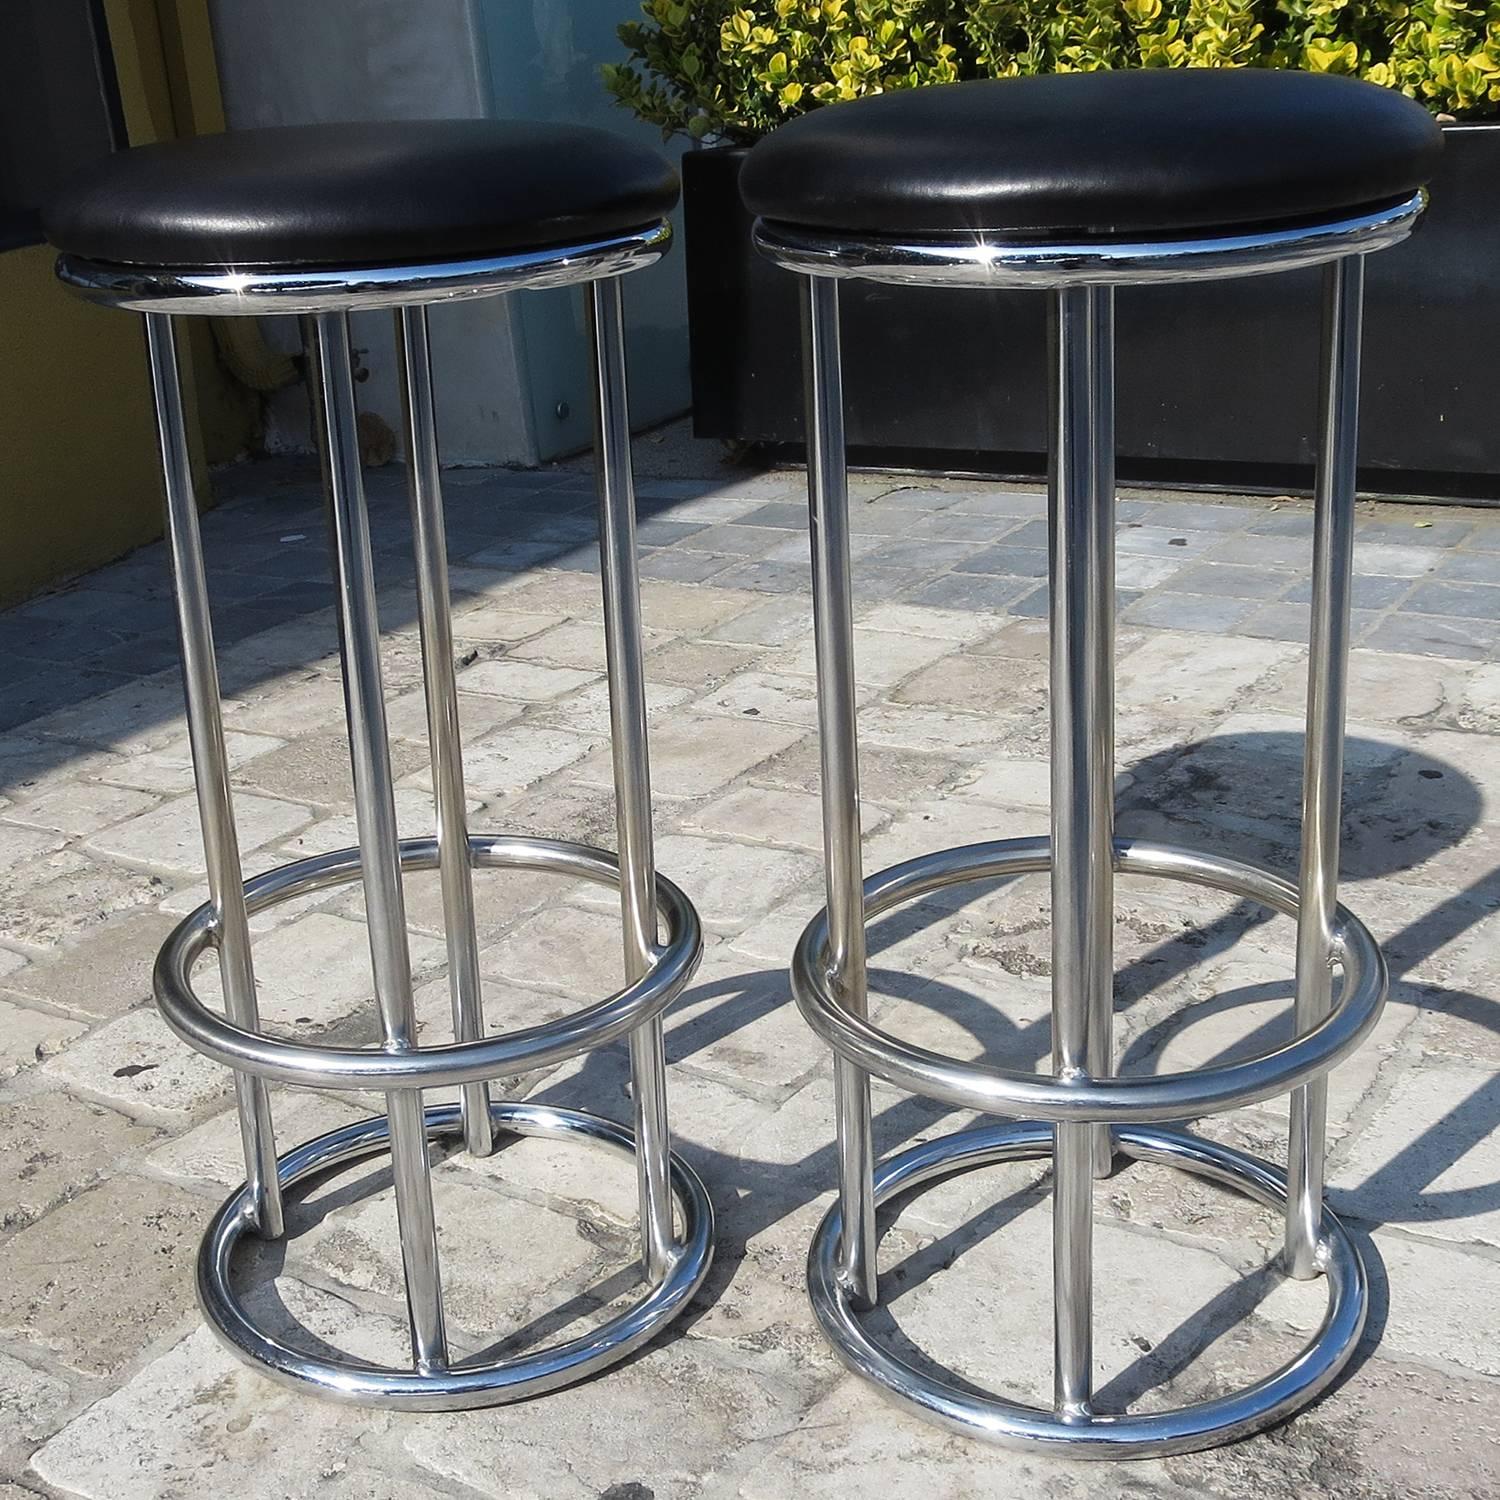 This charming pair are unique in their form. Most stools in tubular chrome end in four legs to the floor, while ours have a stylish ring to finish them off. The chrome is in fine original condition, showing only minor wear. The seats have been